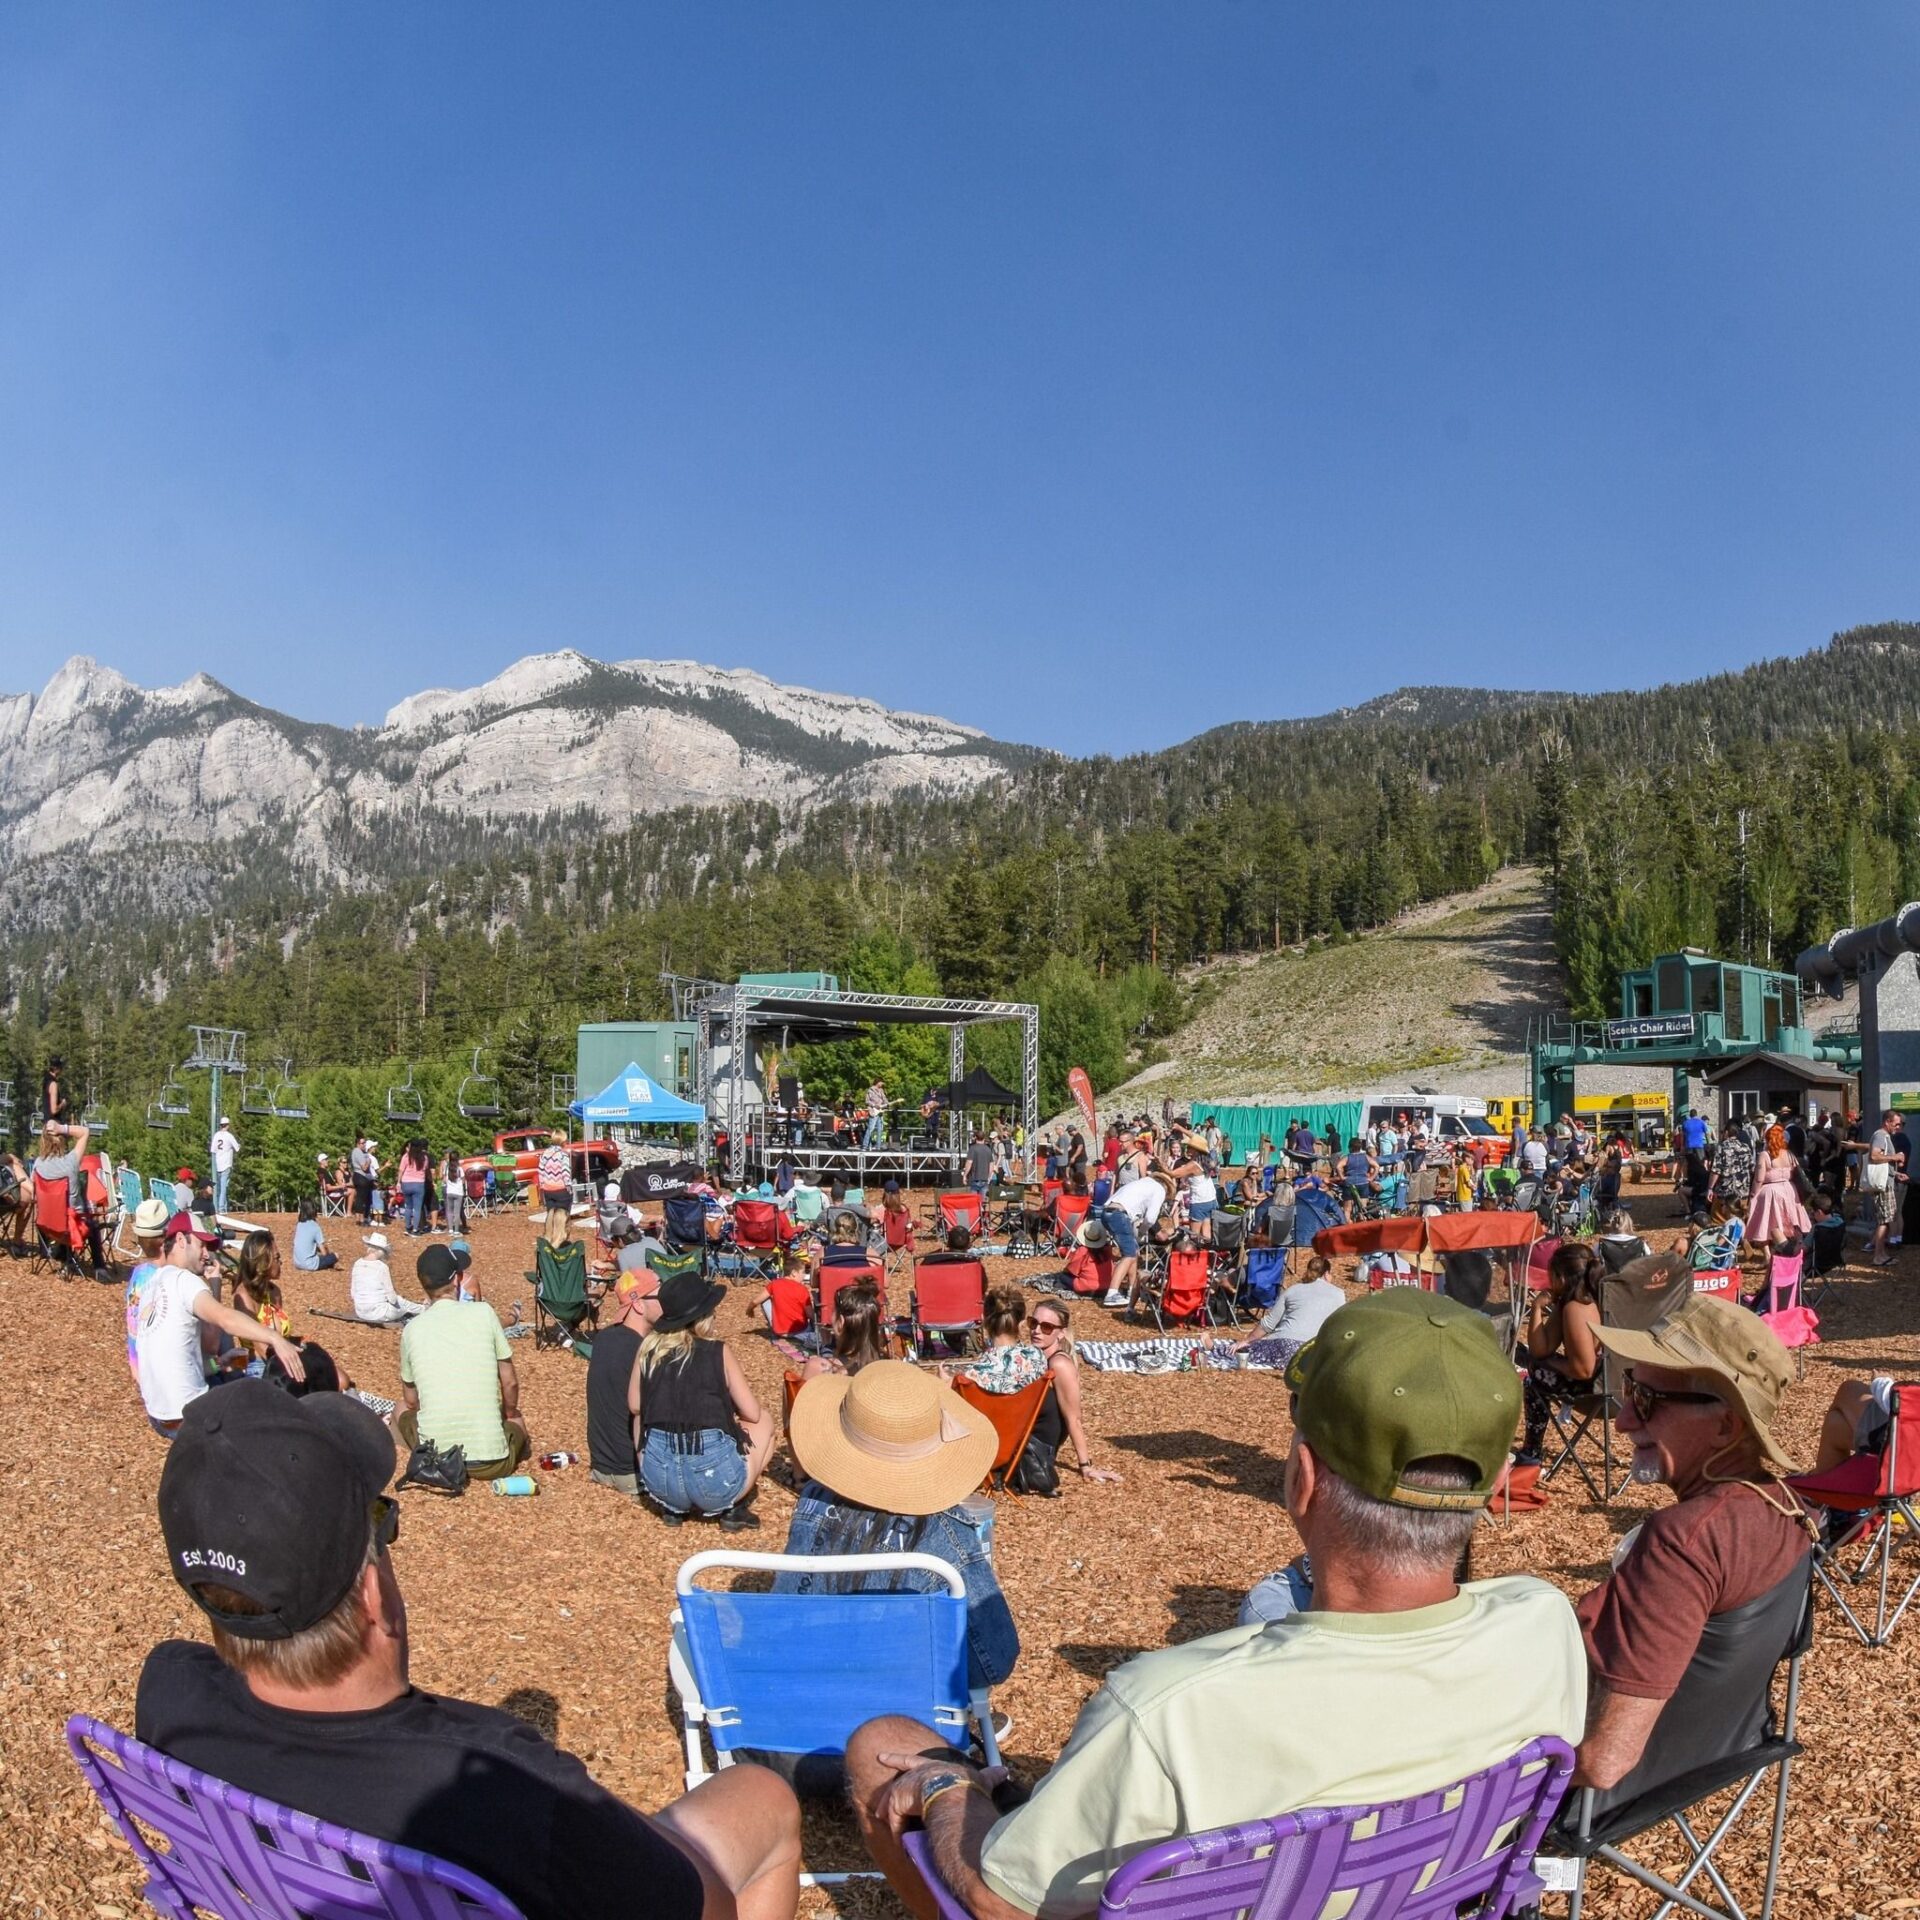 LEE CANYON ANNOUNCES MOUNTAIN FEST MUSIC FESTIVAL FEATURING BIRDIES AND